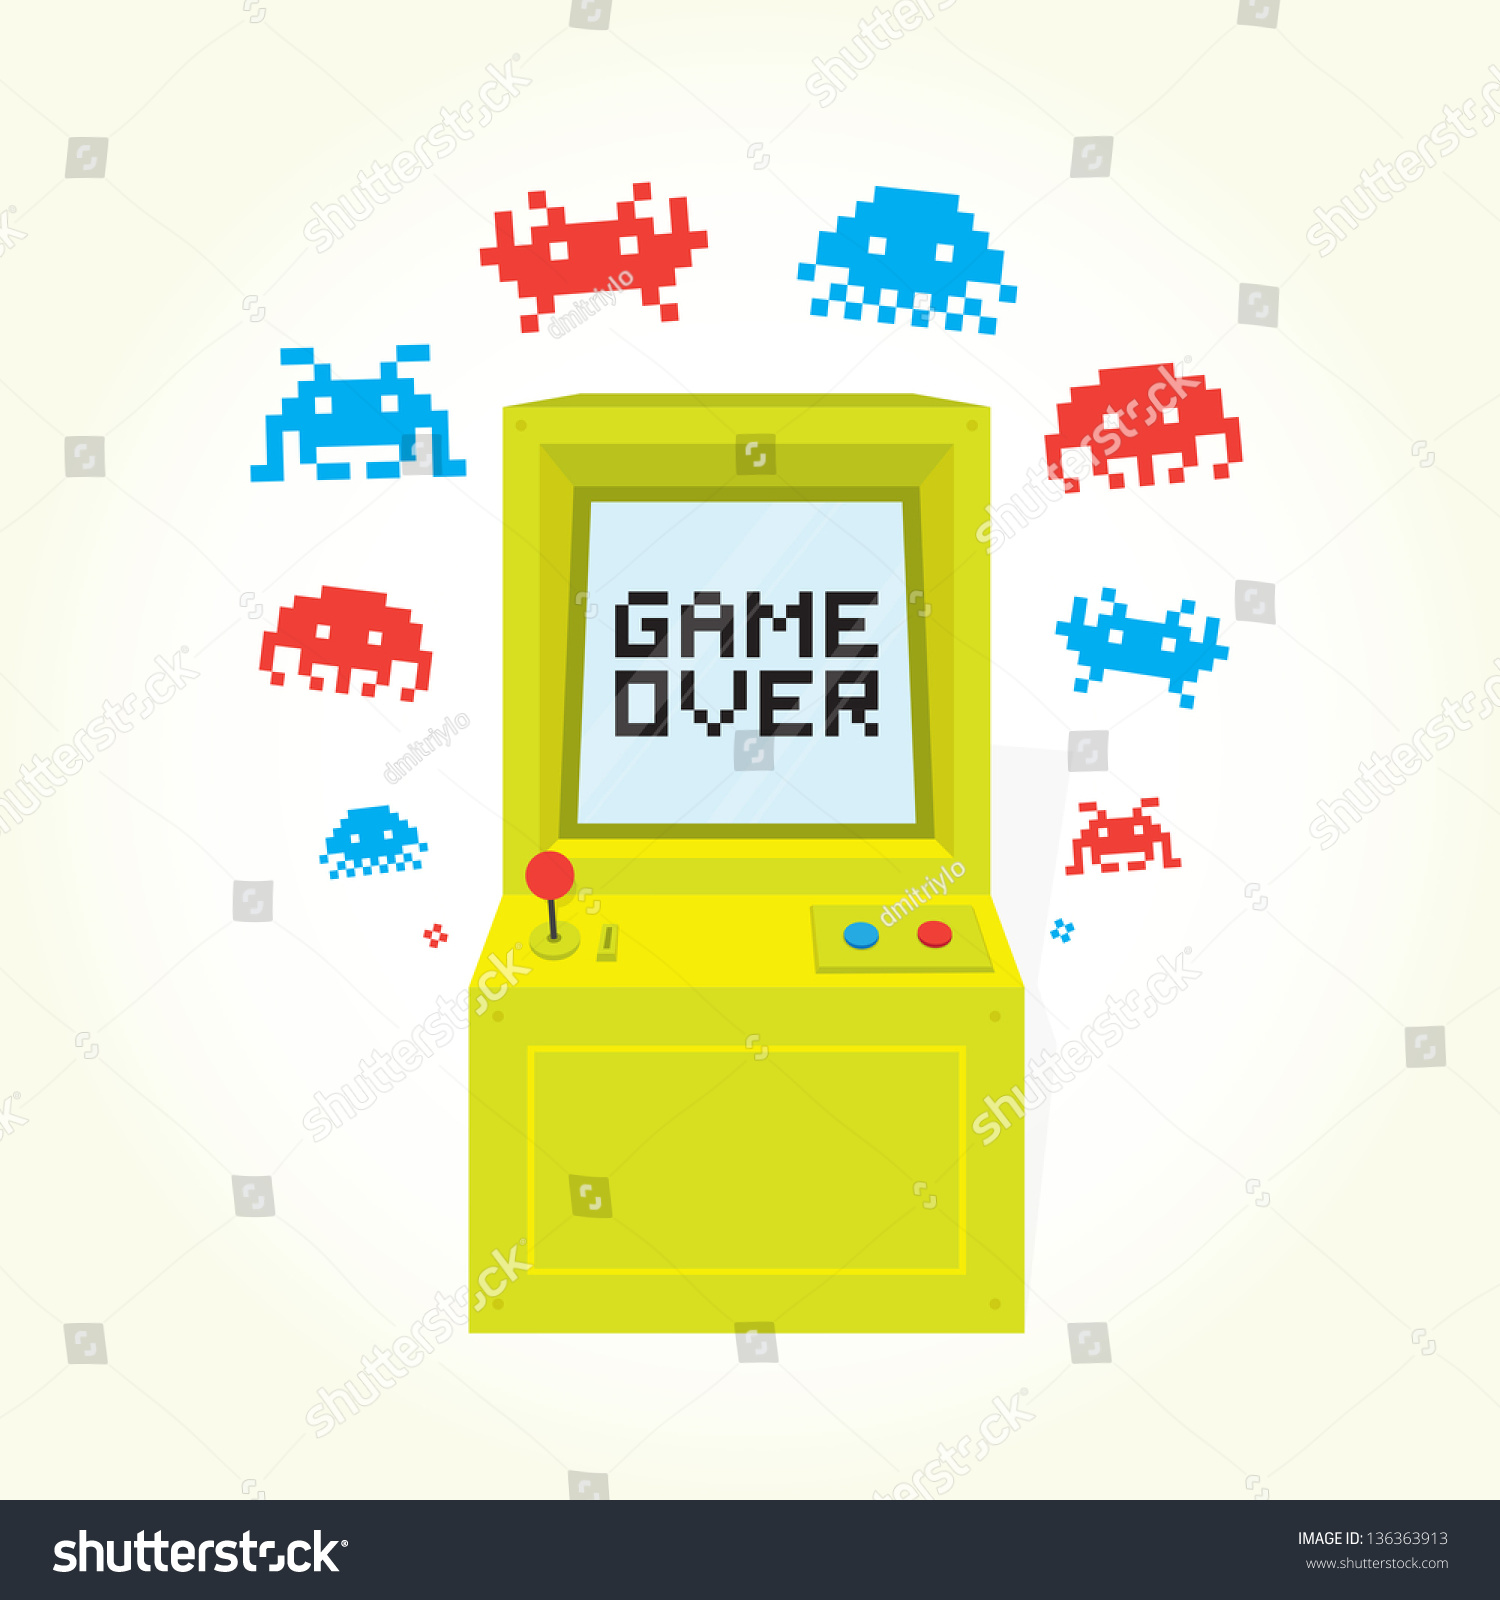 Game Over On Arcade Machine Isolated Stock Vector 136363913 - Shutterstock